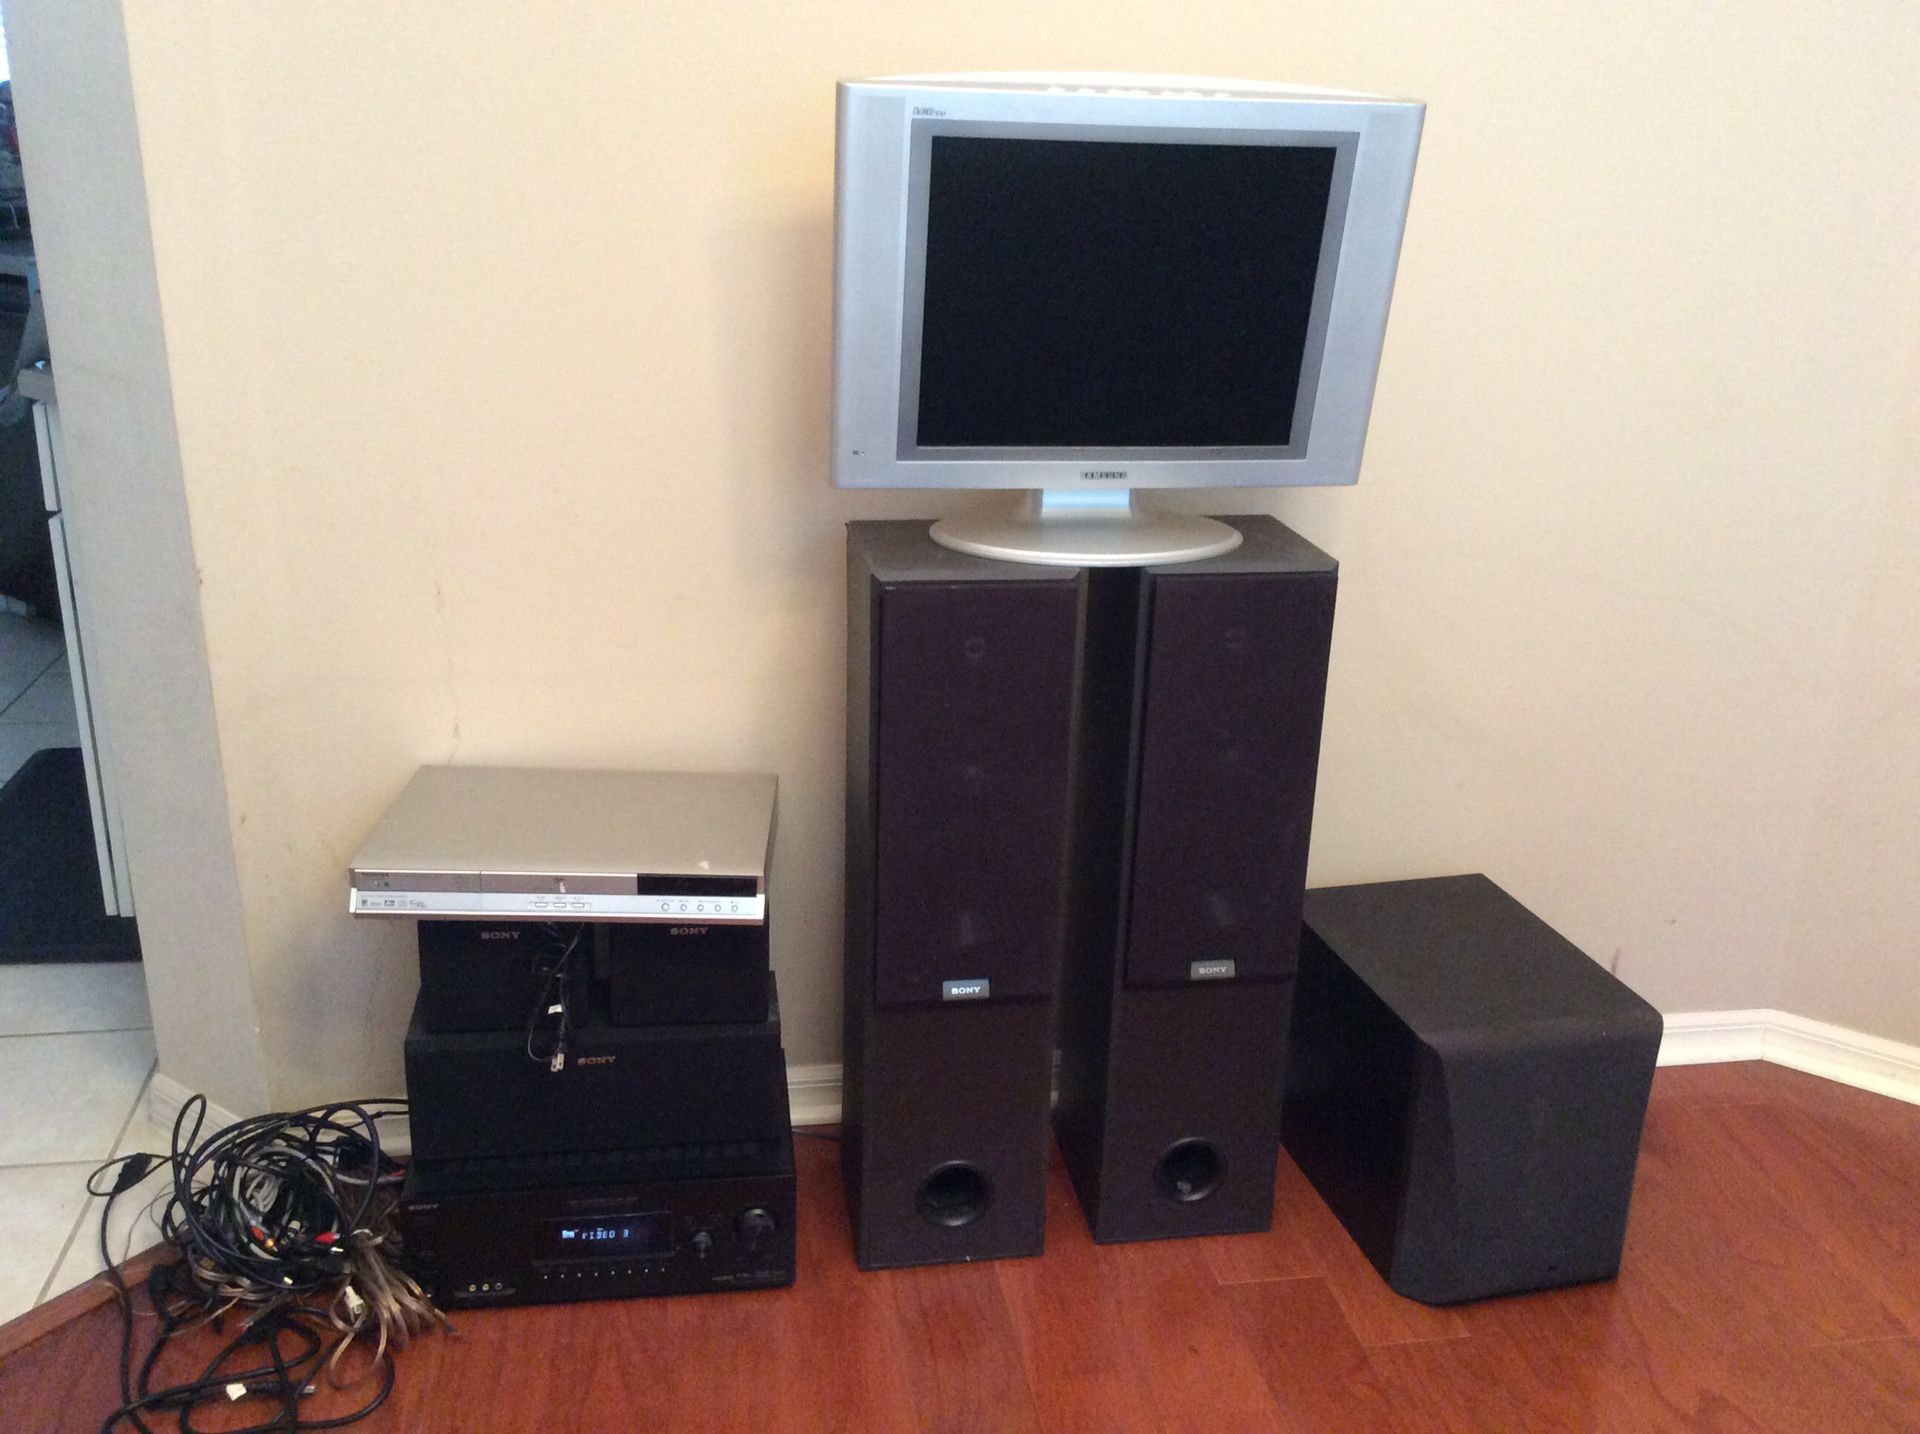 Sony Speakers / tv / receiver/ DVD player and all wires / cable